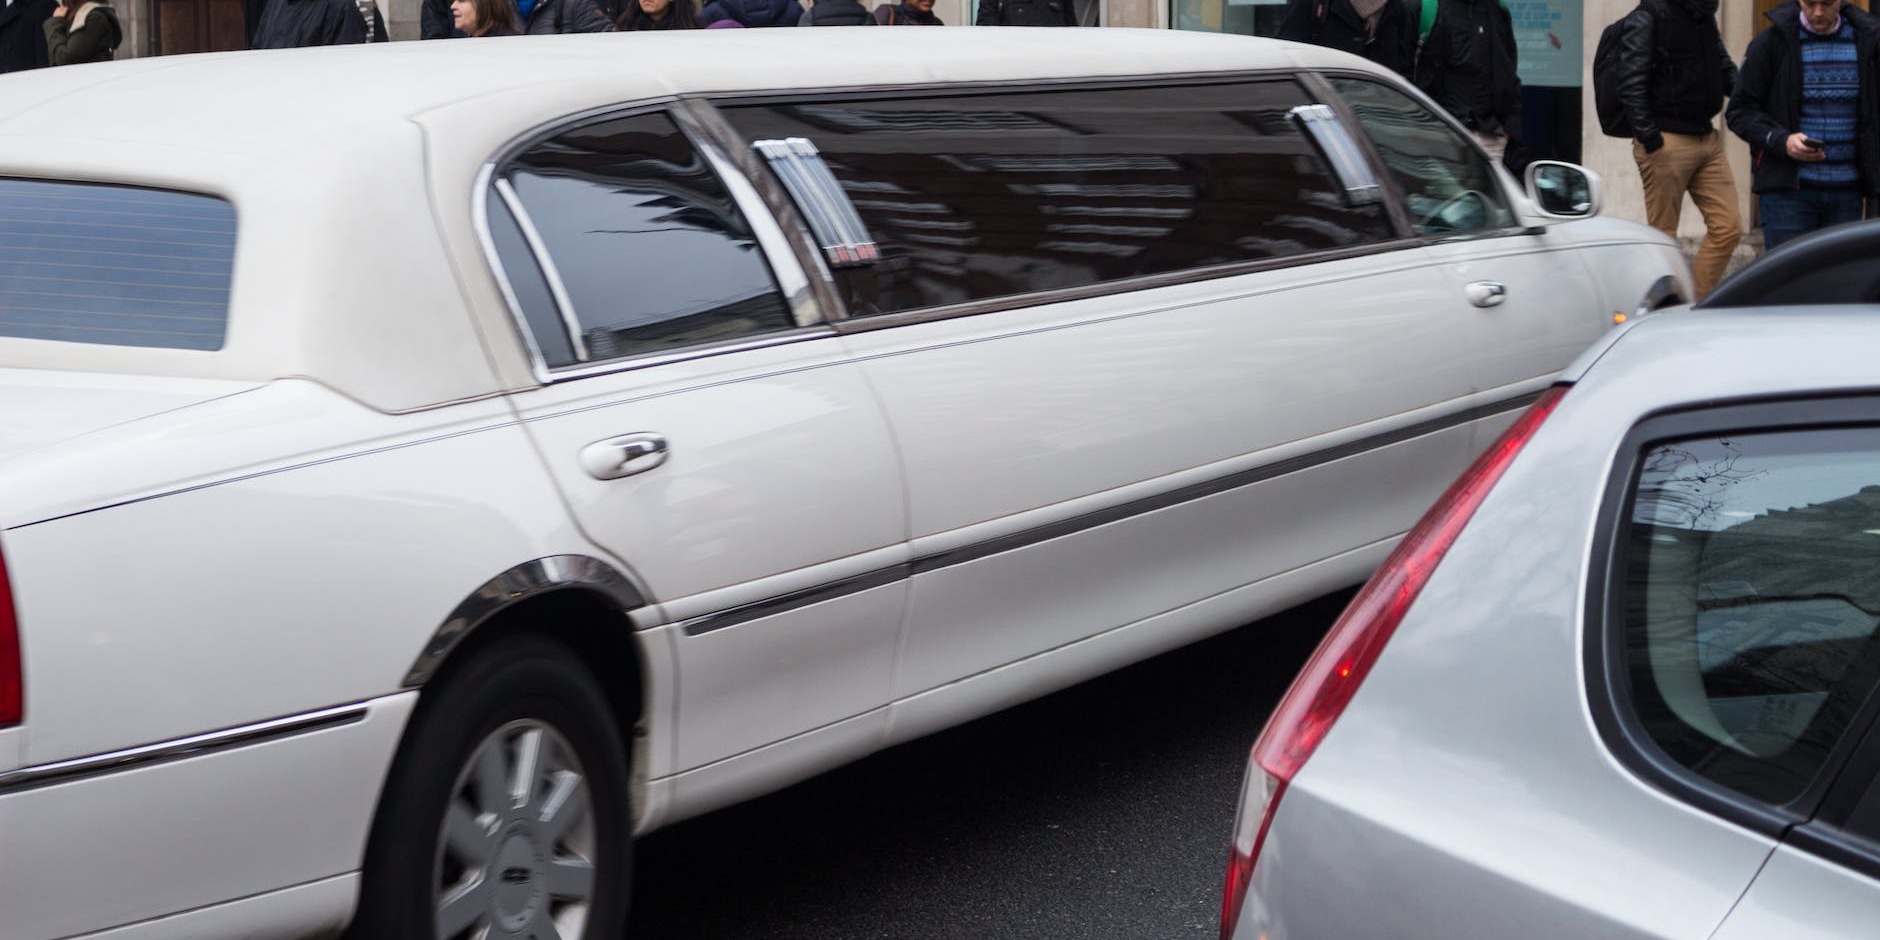 Essential Tips for Hiring a Limo for Your Manchester Event